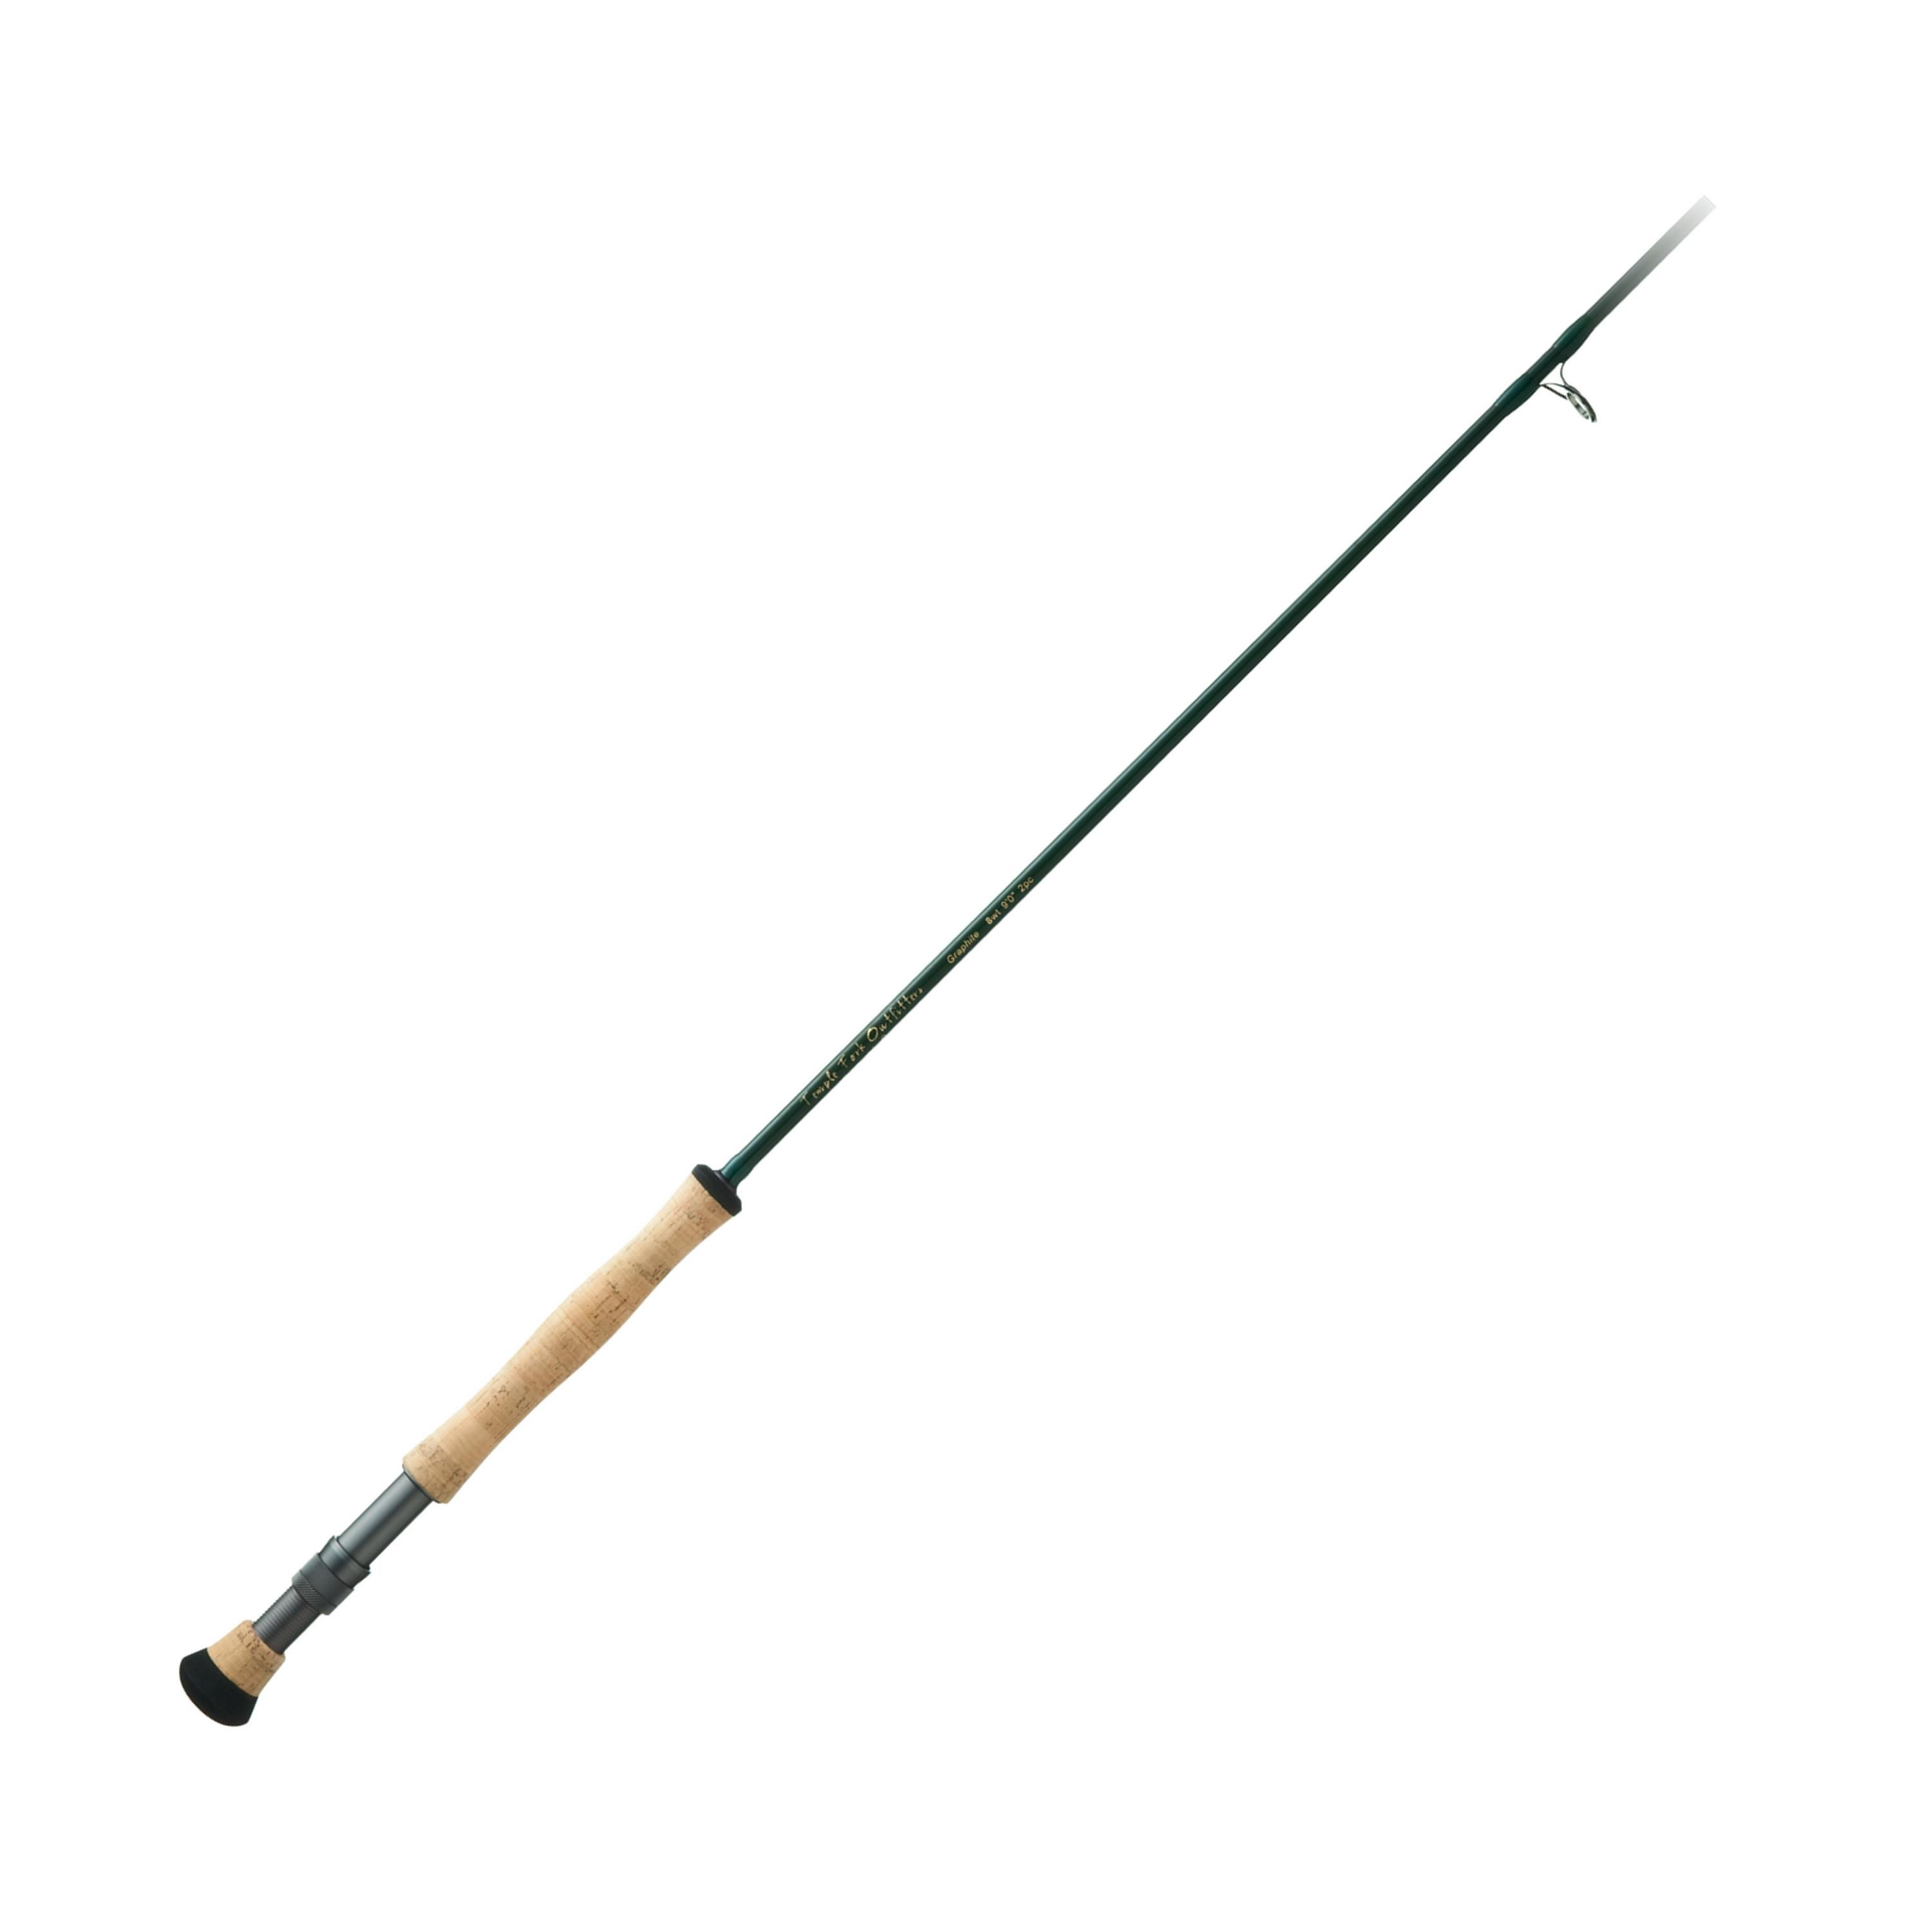 Temple Fork Outfitters Signature 2 Fly Rod